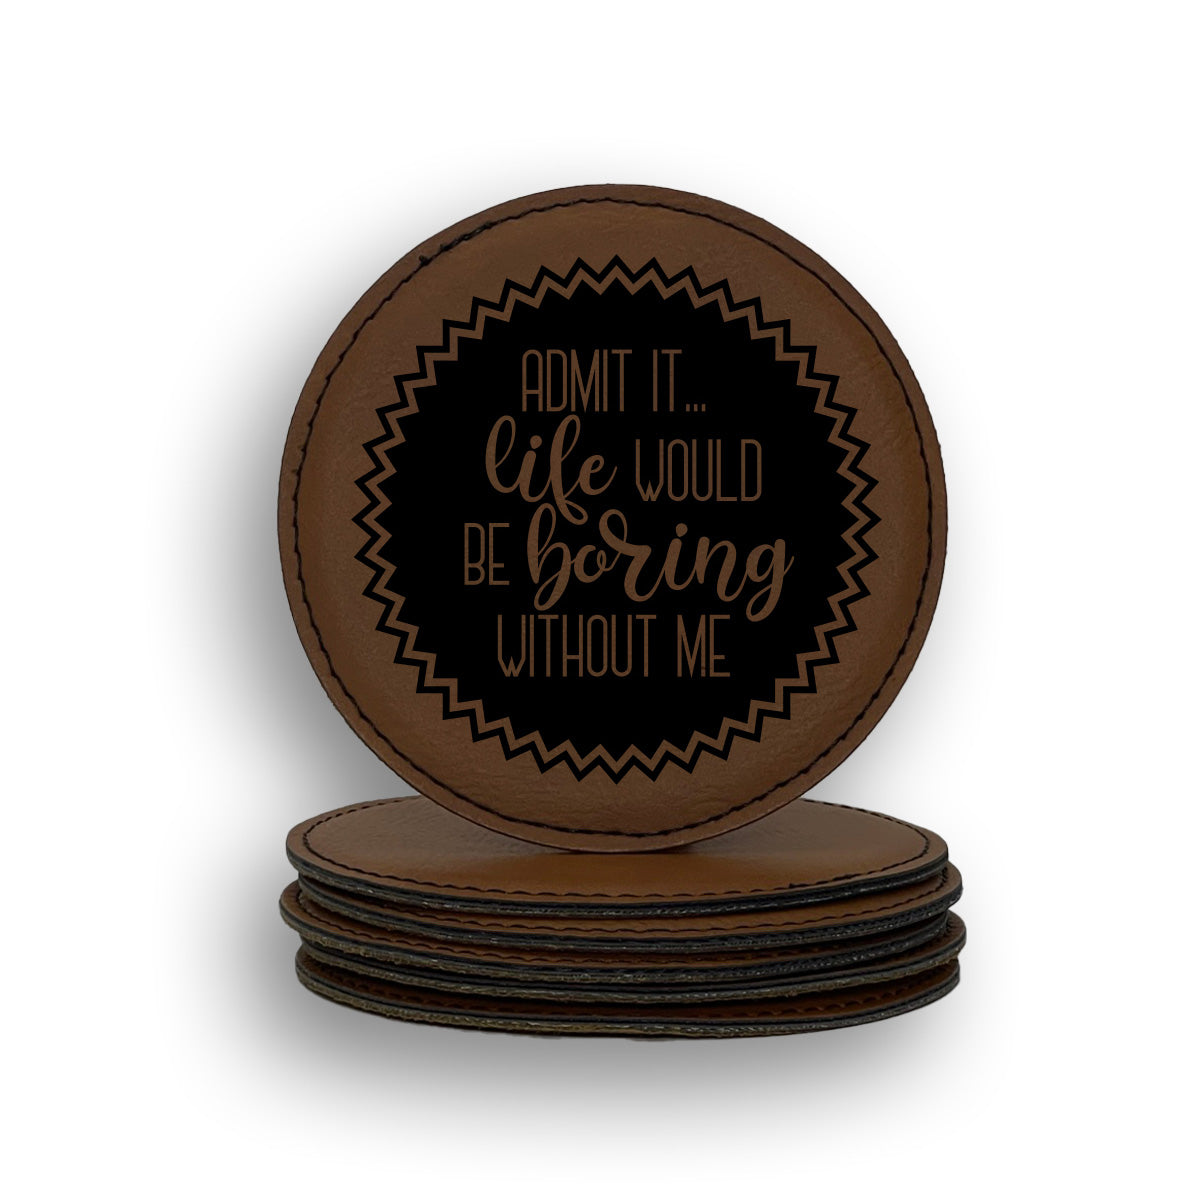 Admit It Life Would Be Boring Without Me Coaster